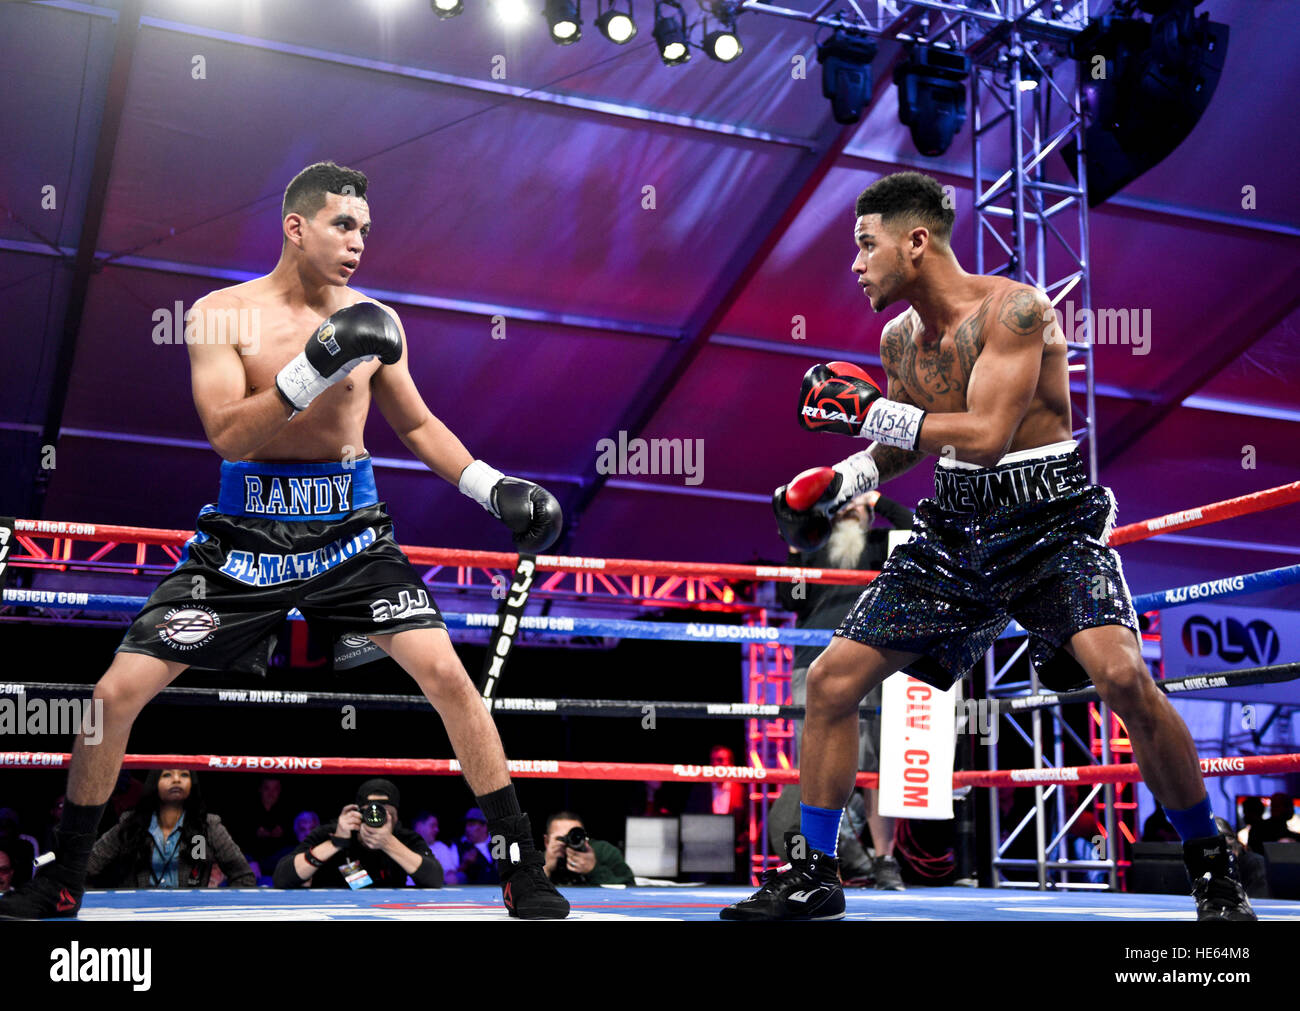 Las Vegas, Nevada, USA. 17th December, 2016.  The undefeated Randy 'El Matador' Moreno takes on 'Money' Mike Fowler in a 6 round Junior Lightweight bout at “Knockout Night at the D”  presented by the D Las Vegas and DLVEC and promoted by Roy Jones Jr. Boxing. Credit: Ken Howard/Alamy Live News Stock Photo